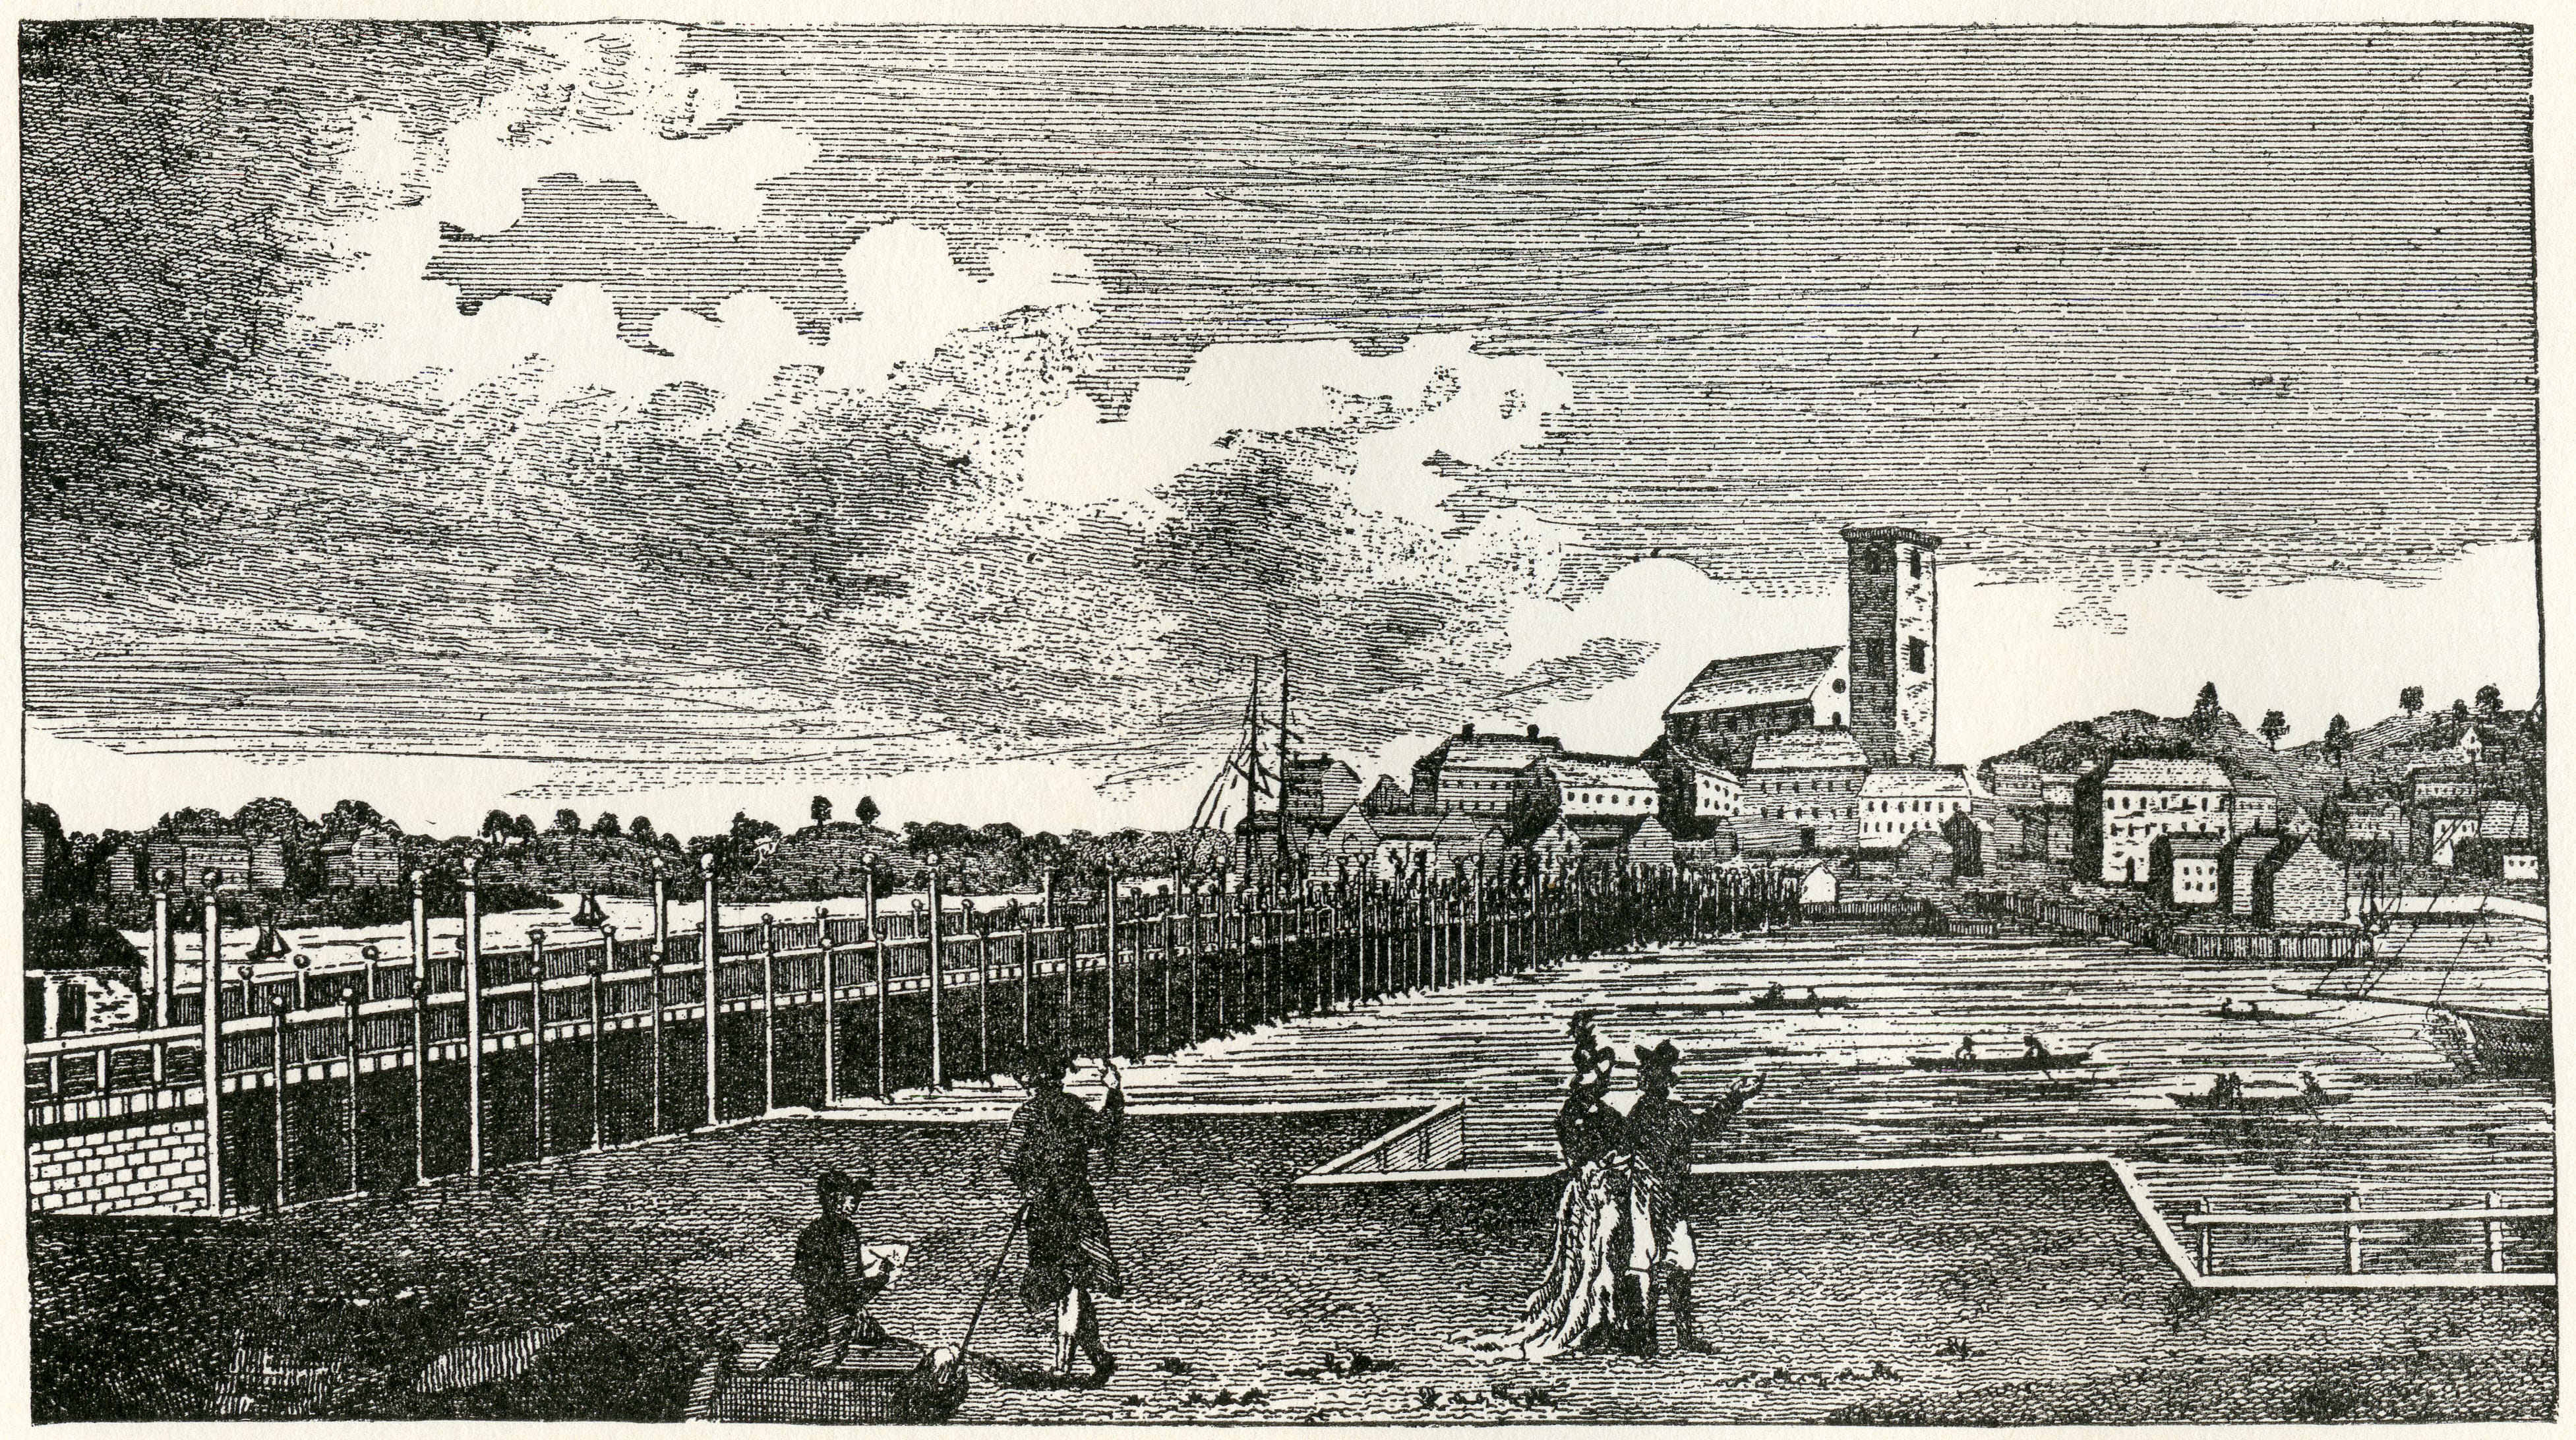 Image of “Charles River Bridge” from “Antique Views of Ye Towne of Boston”